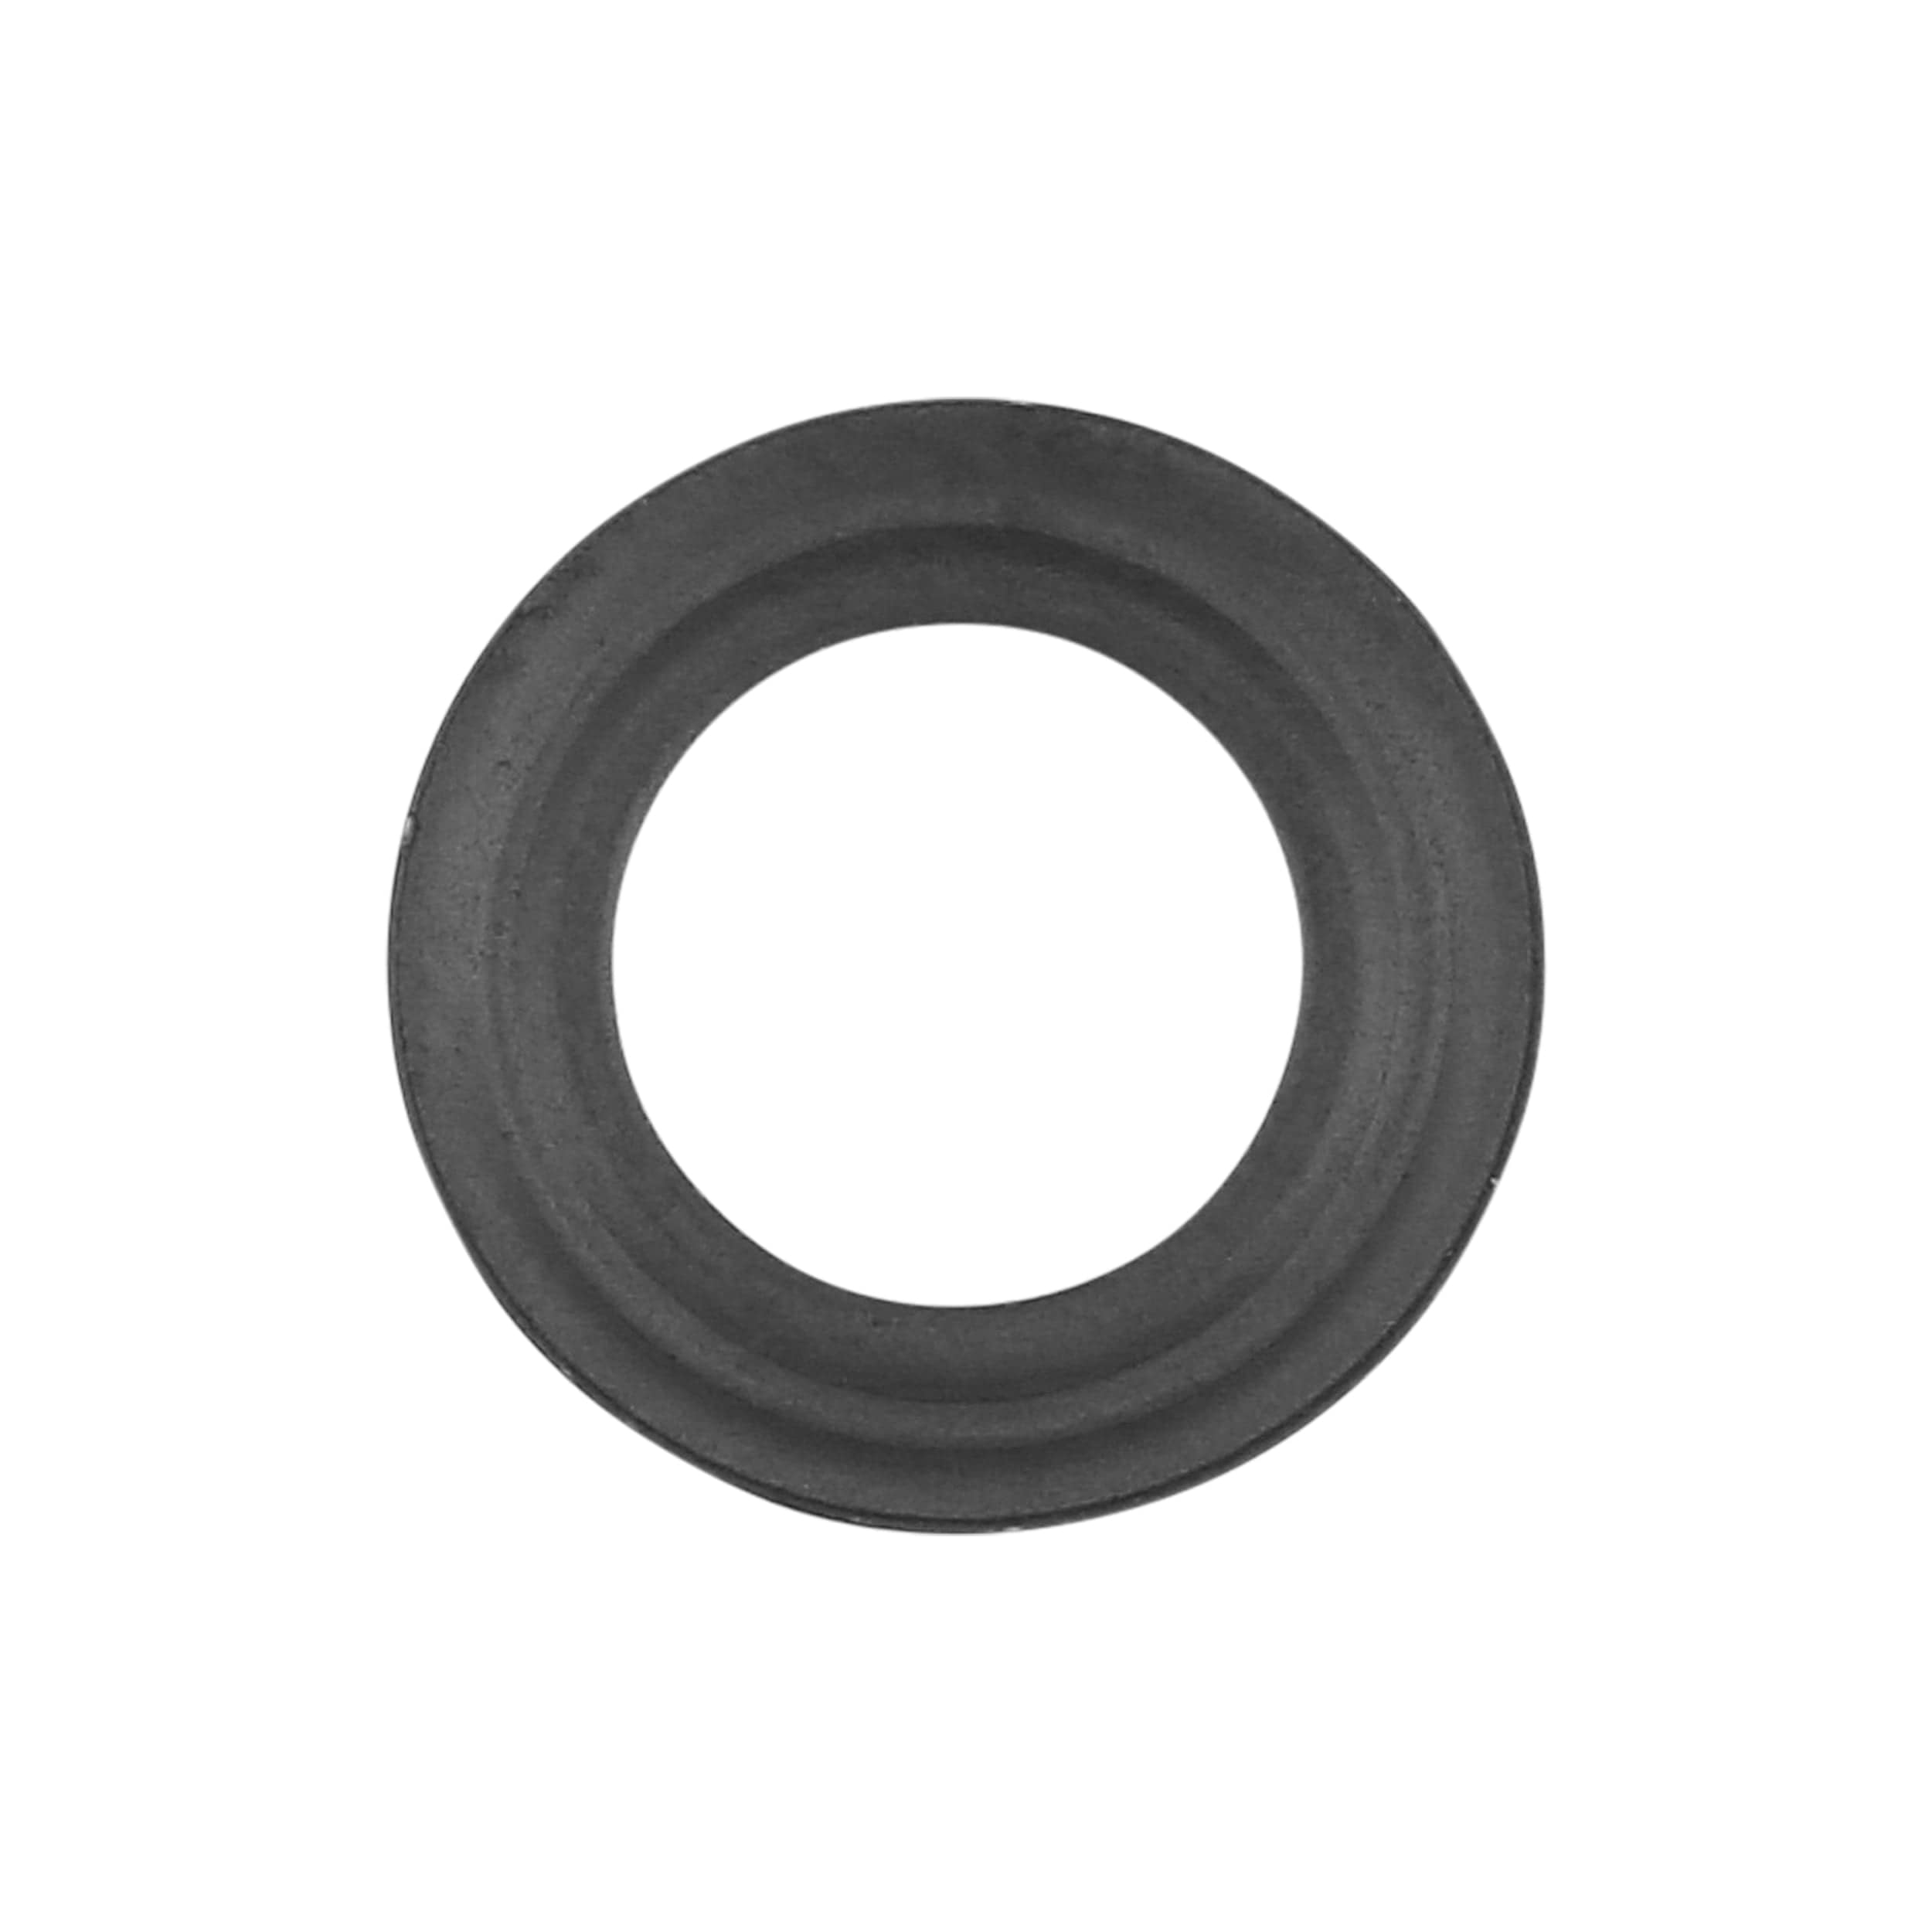 Ohio Travel Bag Fasteners 1/4" Black, Washer, Steel - 24 pk, #A-400-BLK A-400-BLK